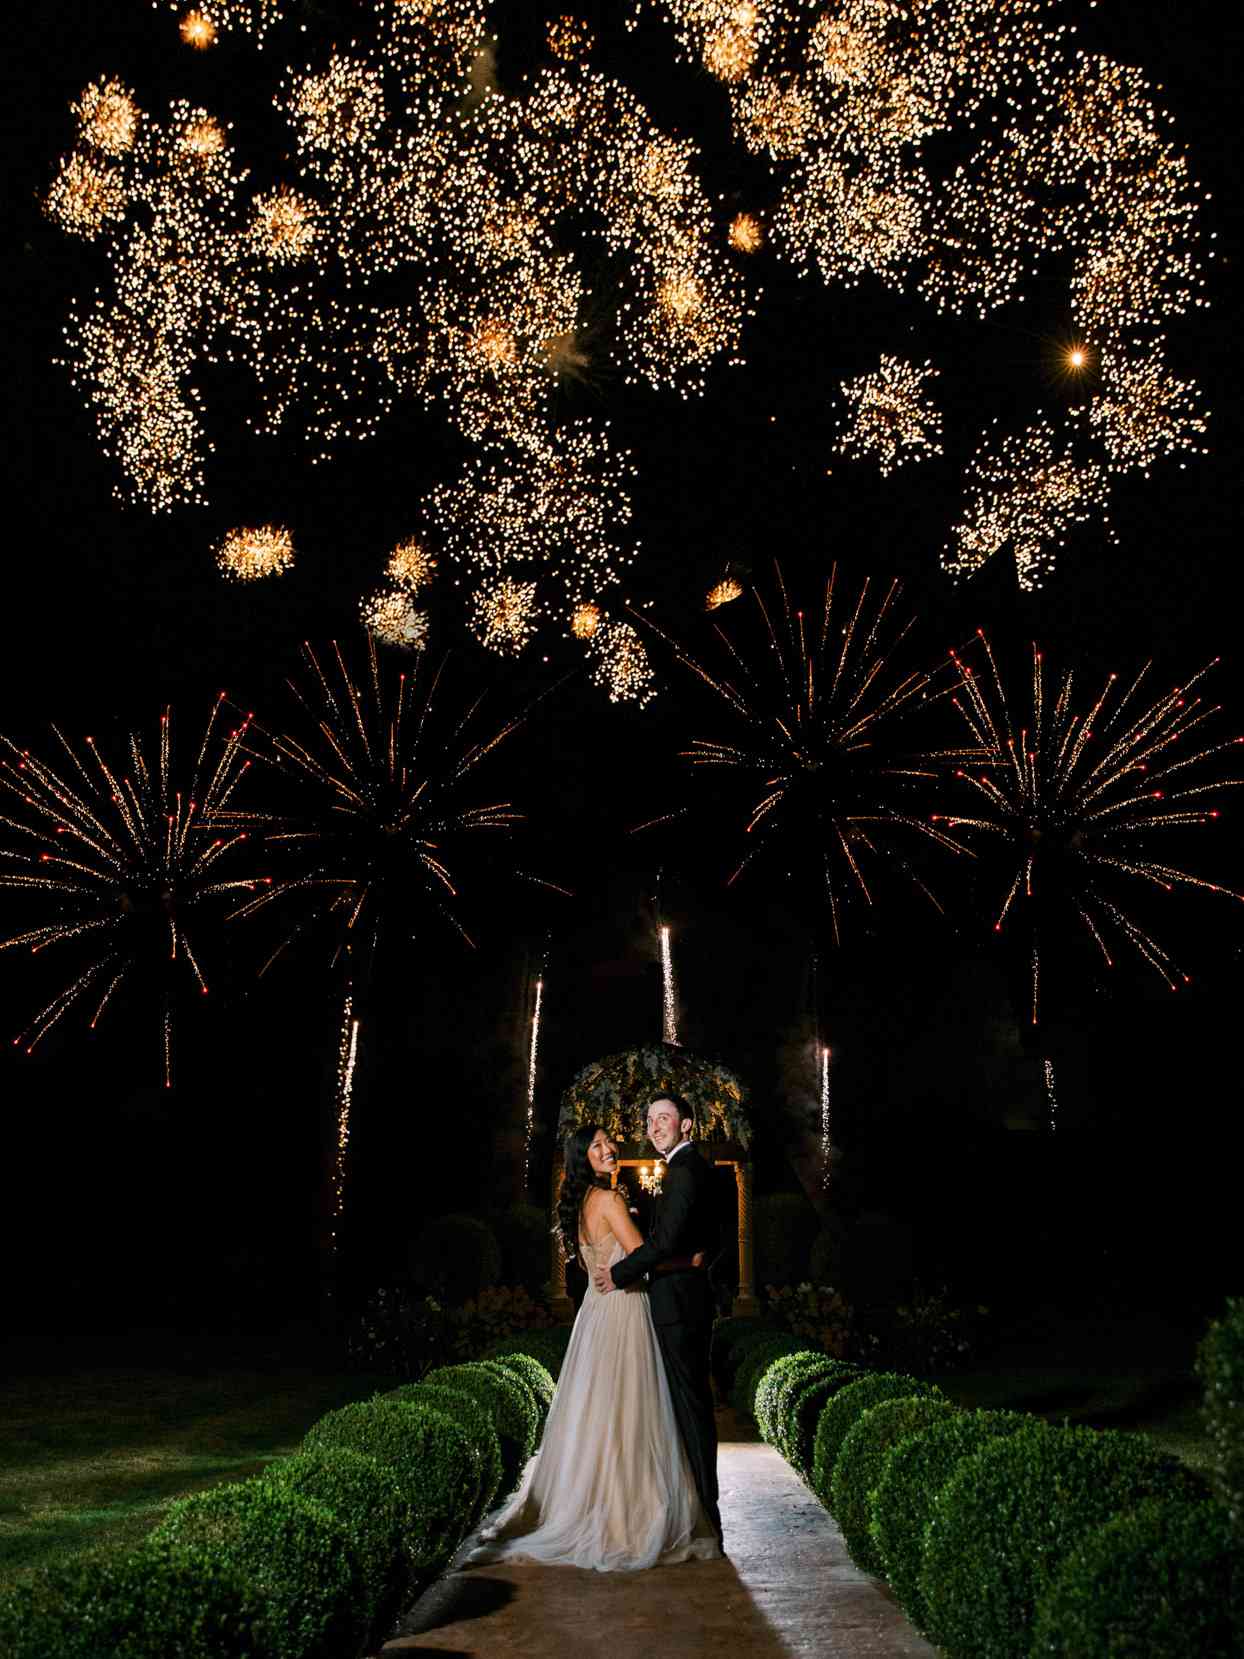 couple under fireworks in night sky